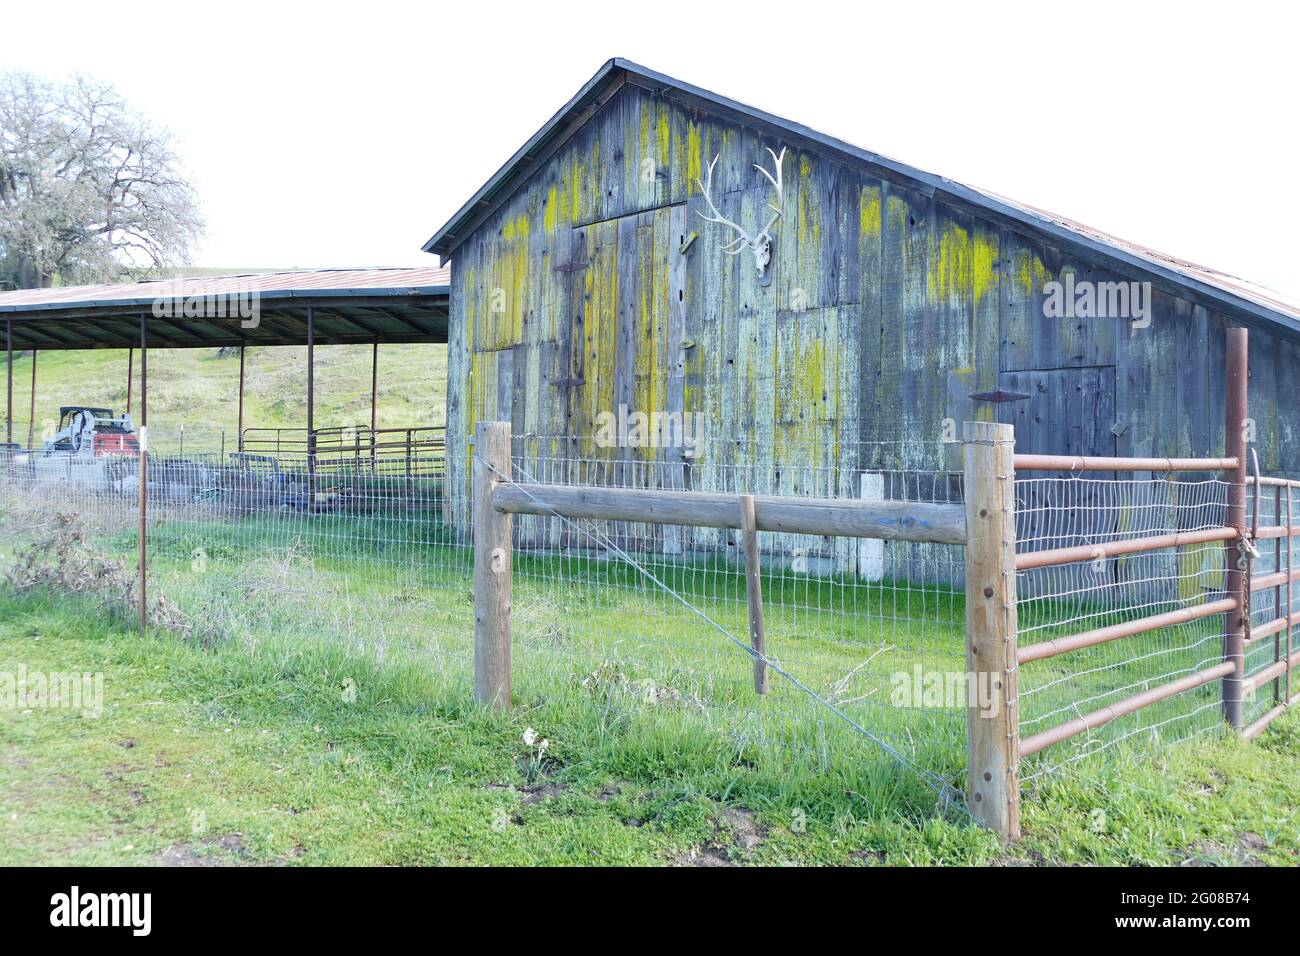 Farm with a weathered barn and corral fence Stock Photo